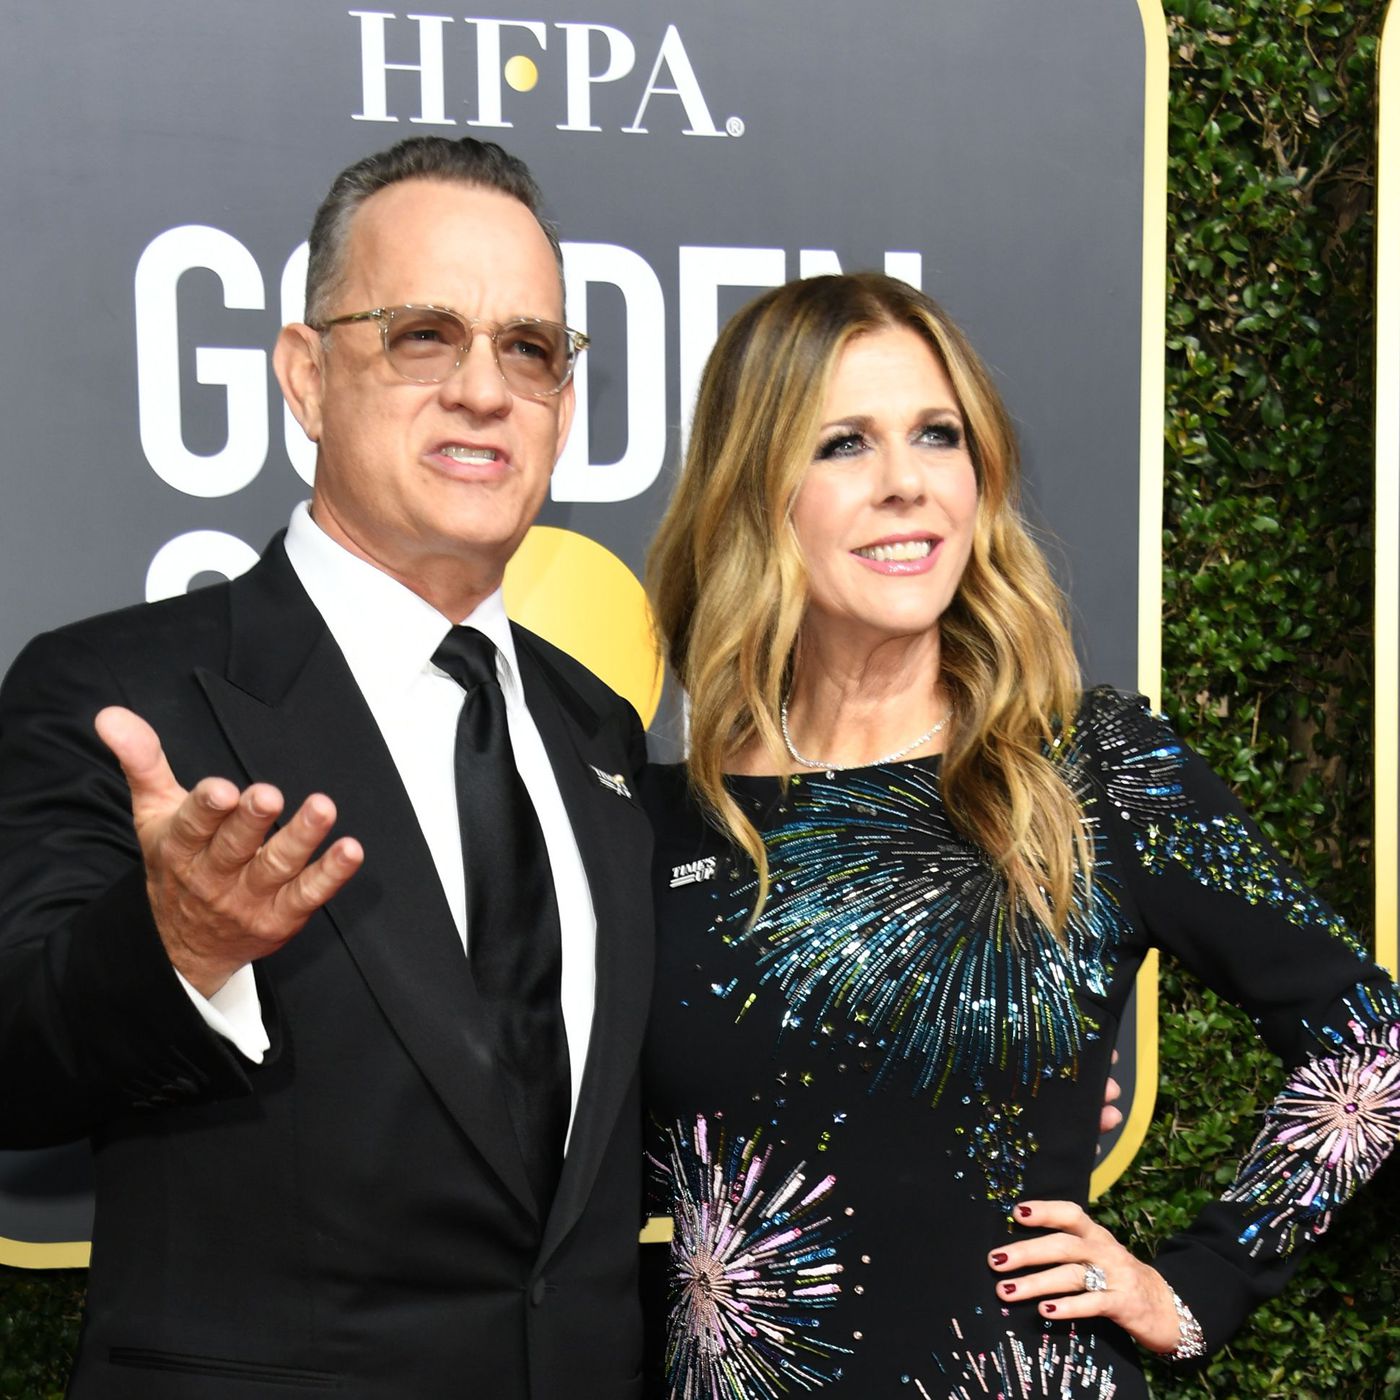 Tom-Hanks-and-Rita-Wilson-now-become-proud-Greek-citizens-2